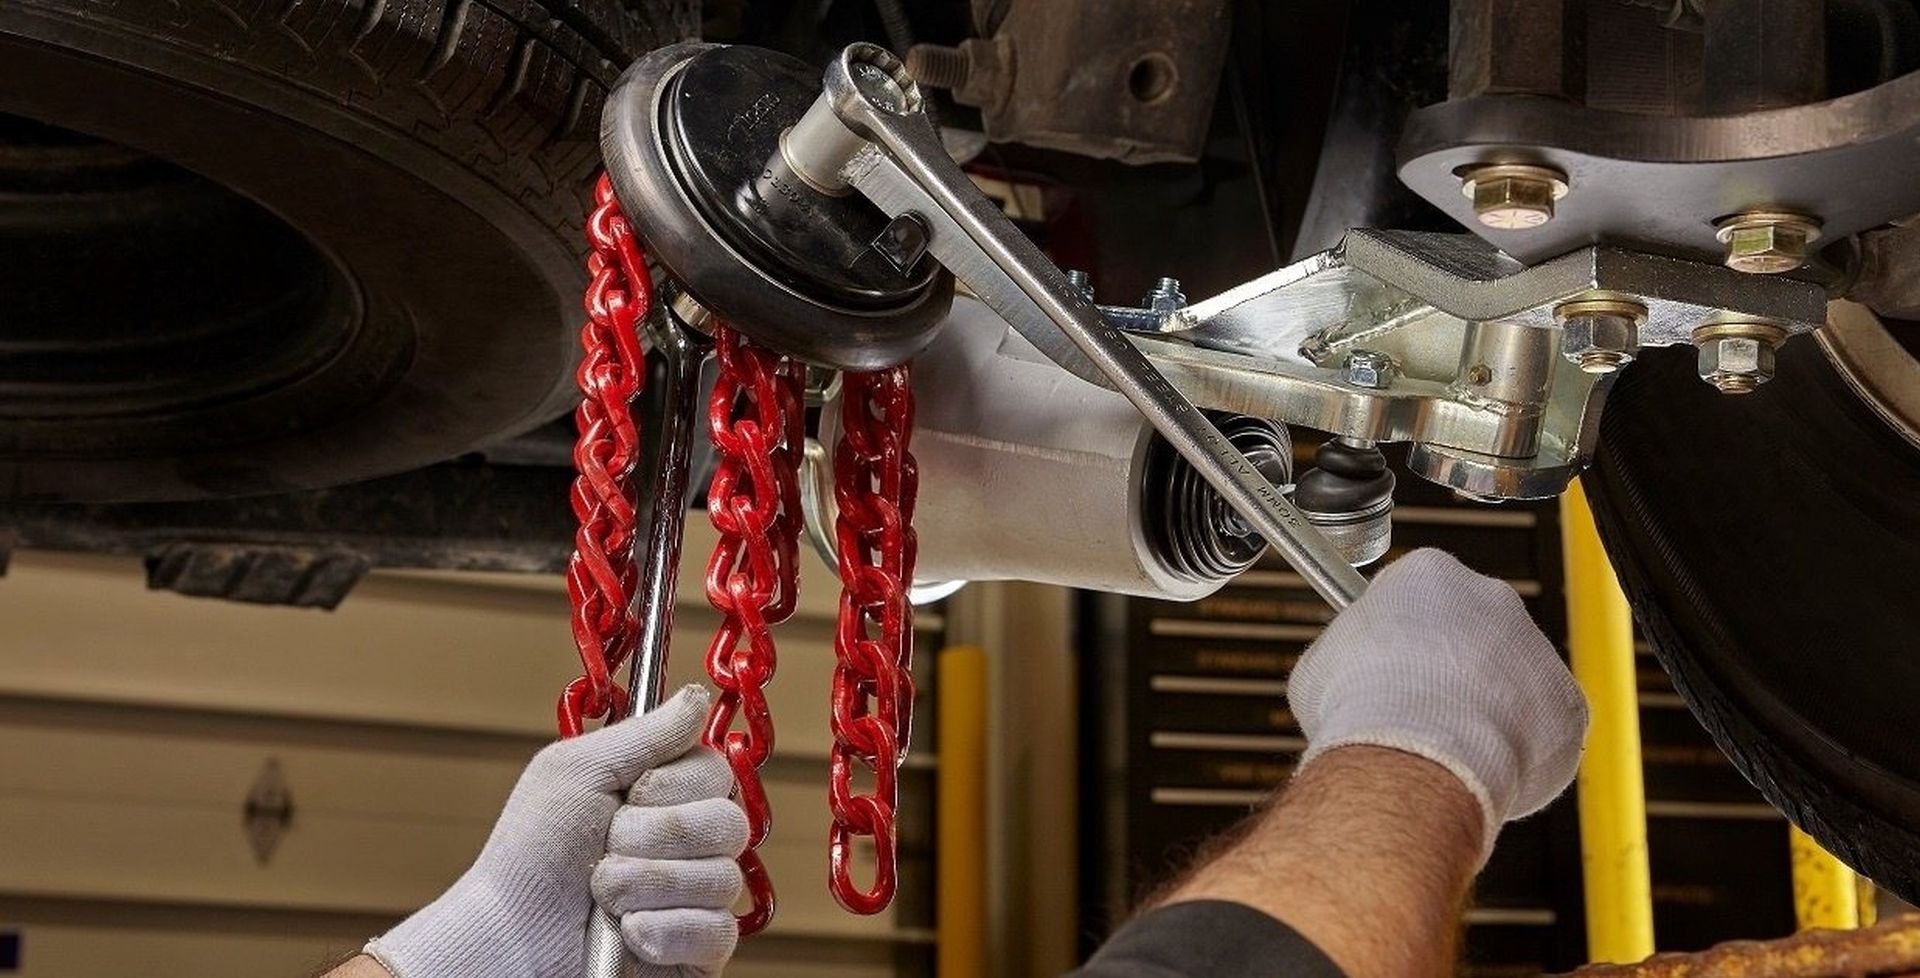 Onspot automatic tire chains: What mechanics need to know